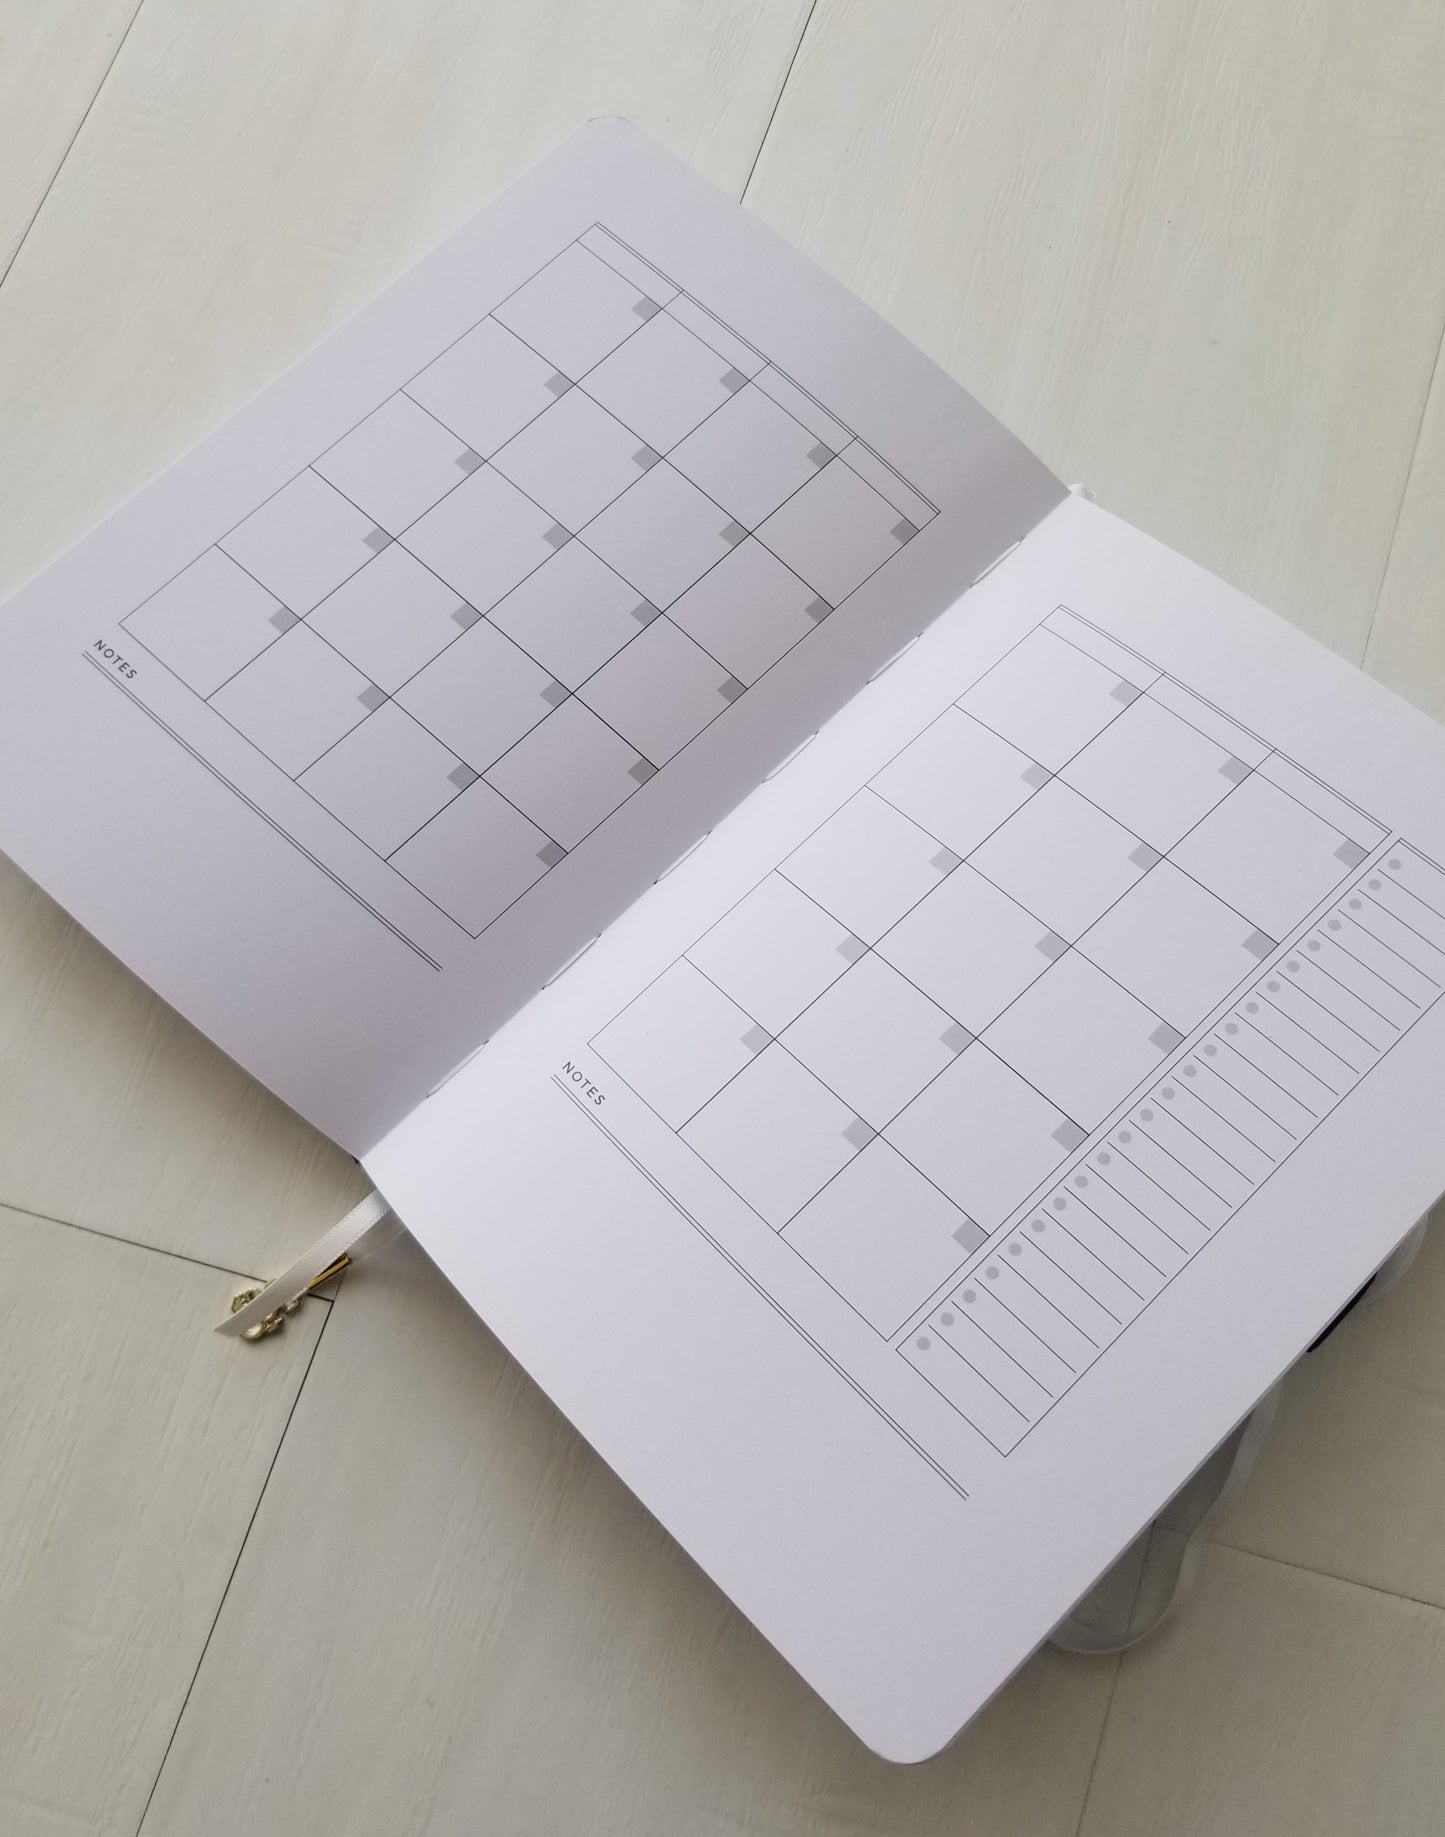 Daily Agenda - A 12 Month Book Of Plans